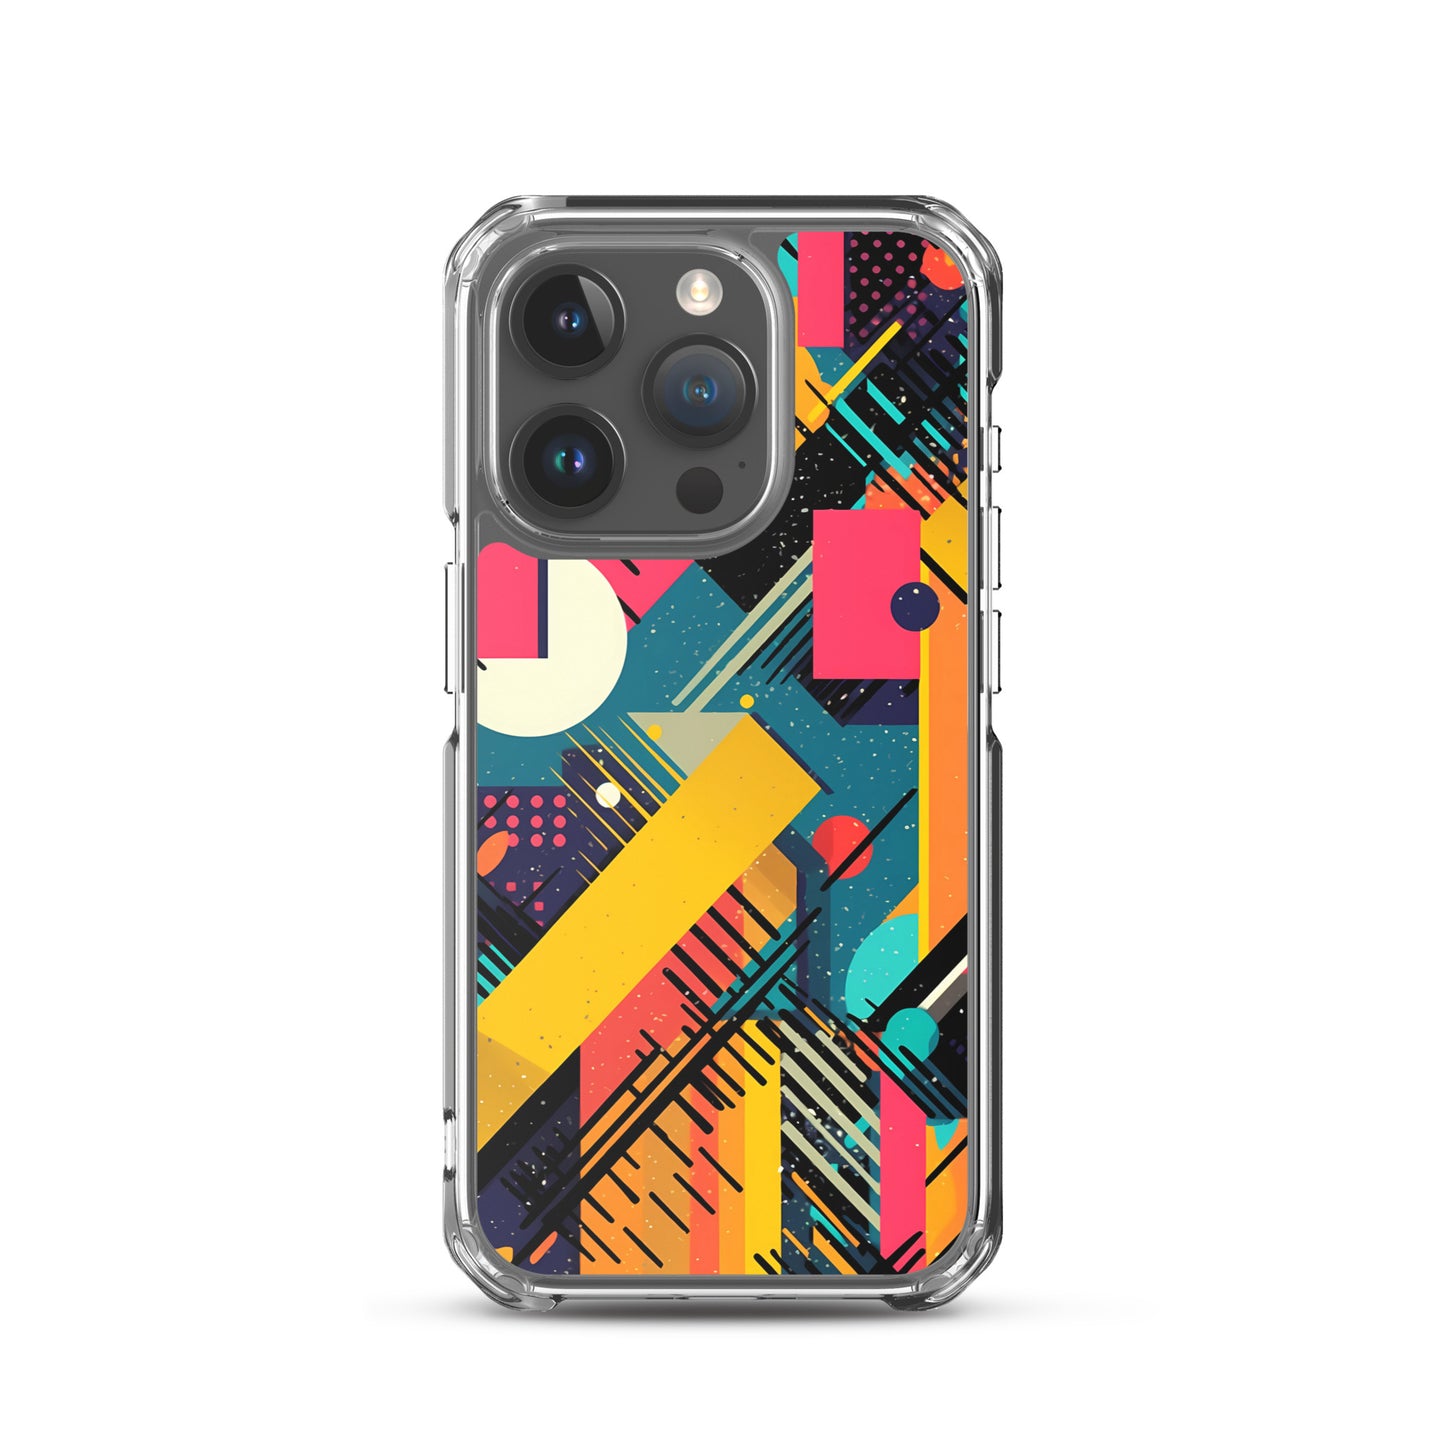 iPhone Case - Bold Patterns #1